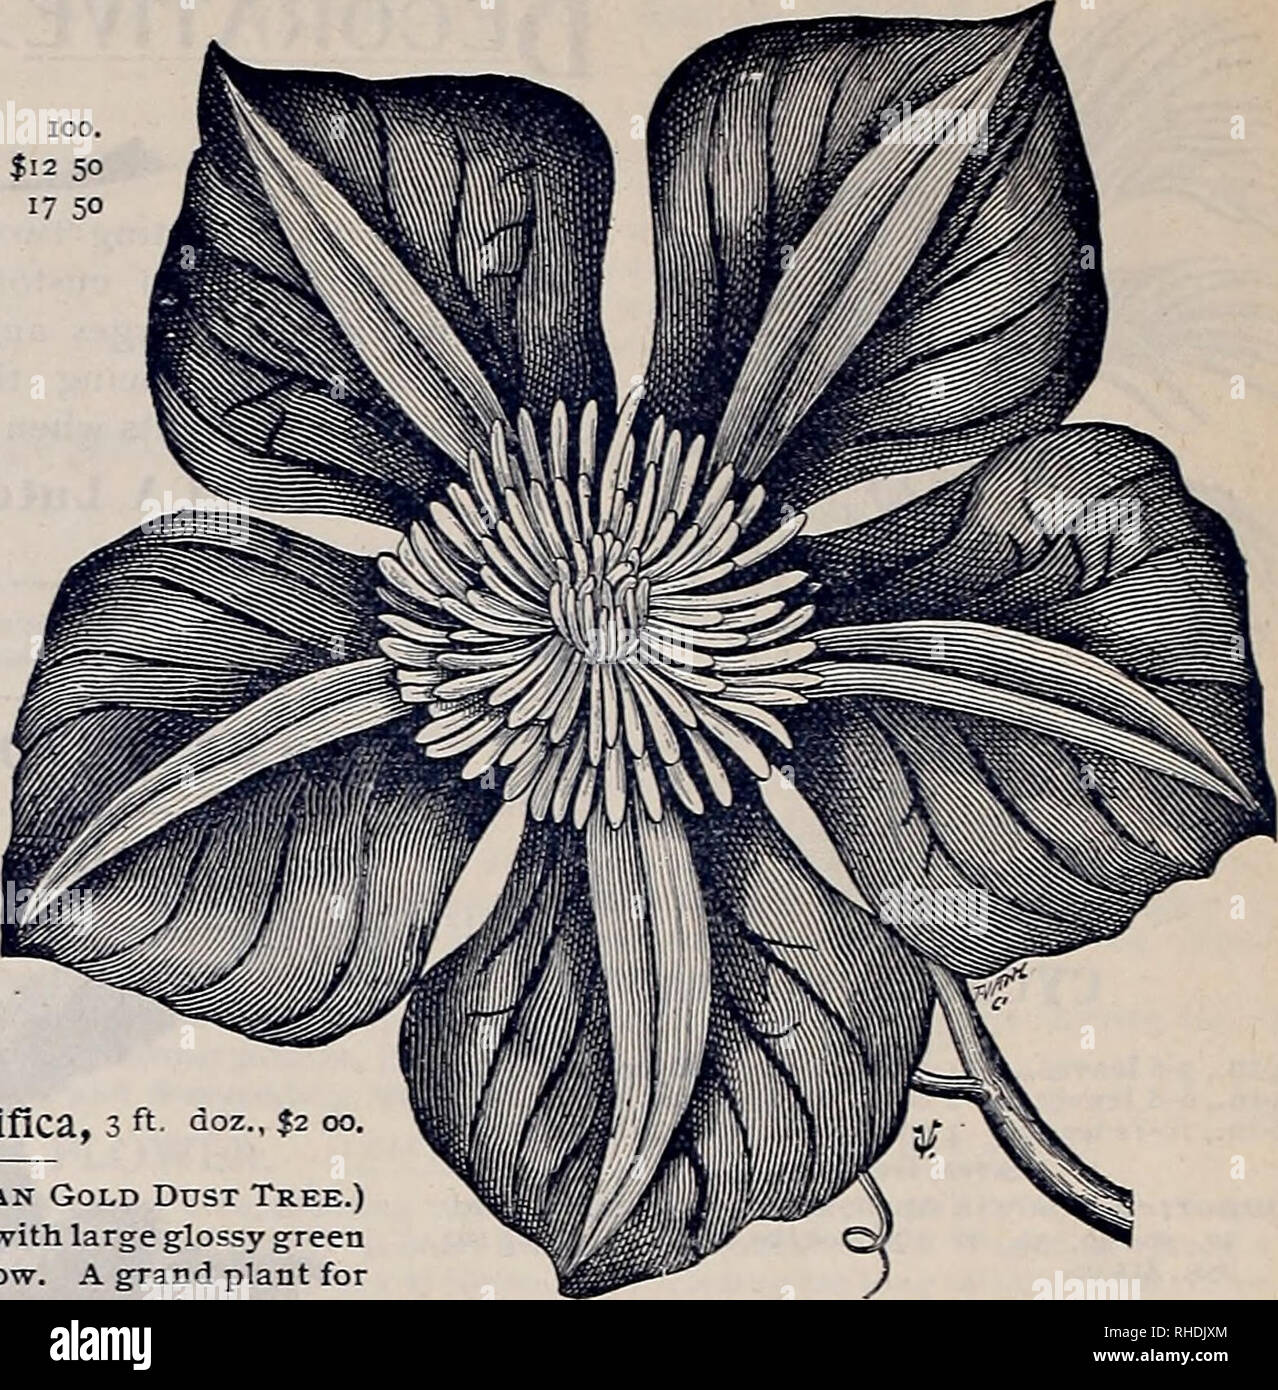 . Book for florists. Flowers Seeds Catalogs; Flowers Seedlings Catalogs; Gardening Equipment and supplies Catalogs. 14 J. C. VAUGHAN, CHICAGO AND NEW YORK, BOOK FOR FLORISTS. K HARDY CLIMBERS. * AMPELOPSIS Veitchii. Doz. 1 year old, 6 to 15 Inches- $o 50 18 to 24 inches   1 00 100. doz. 100. $4 00 I 3 feet, strong $1 7s $12 50 7 00 1 4 to 6 feet, strong: 2 5° J7 5° DOZ. AMPELOPSIS QllinquefOlia.—(Virginia Creeper.) 18 to 24 inches $0 75 AKEBIA Quinata.—Fine climber, 1 year 75 &quot; &quot;2 year, strong   2 00 ARISTOLOCHIA Sipho.— (Dutchman's Pipe.)—3 year old layers 3 00 &quot; 8—10 feet each Stock Photo